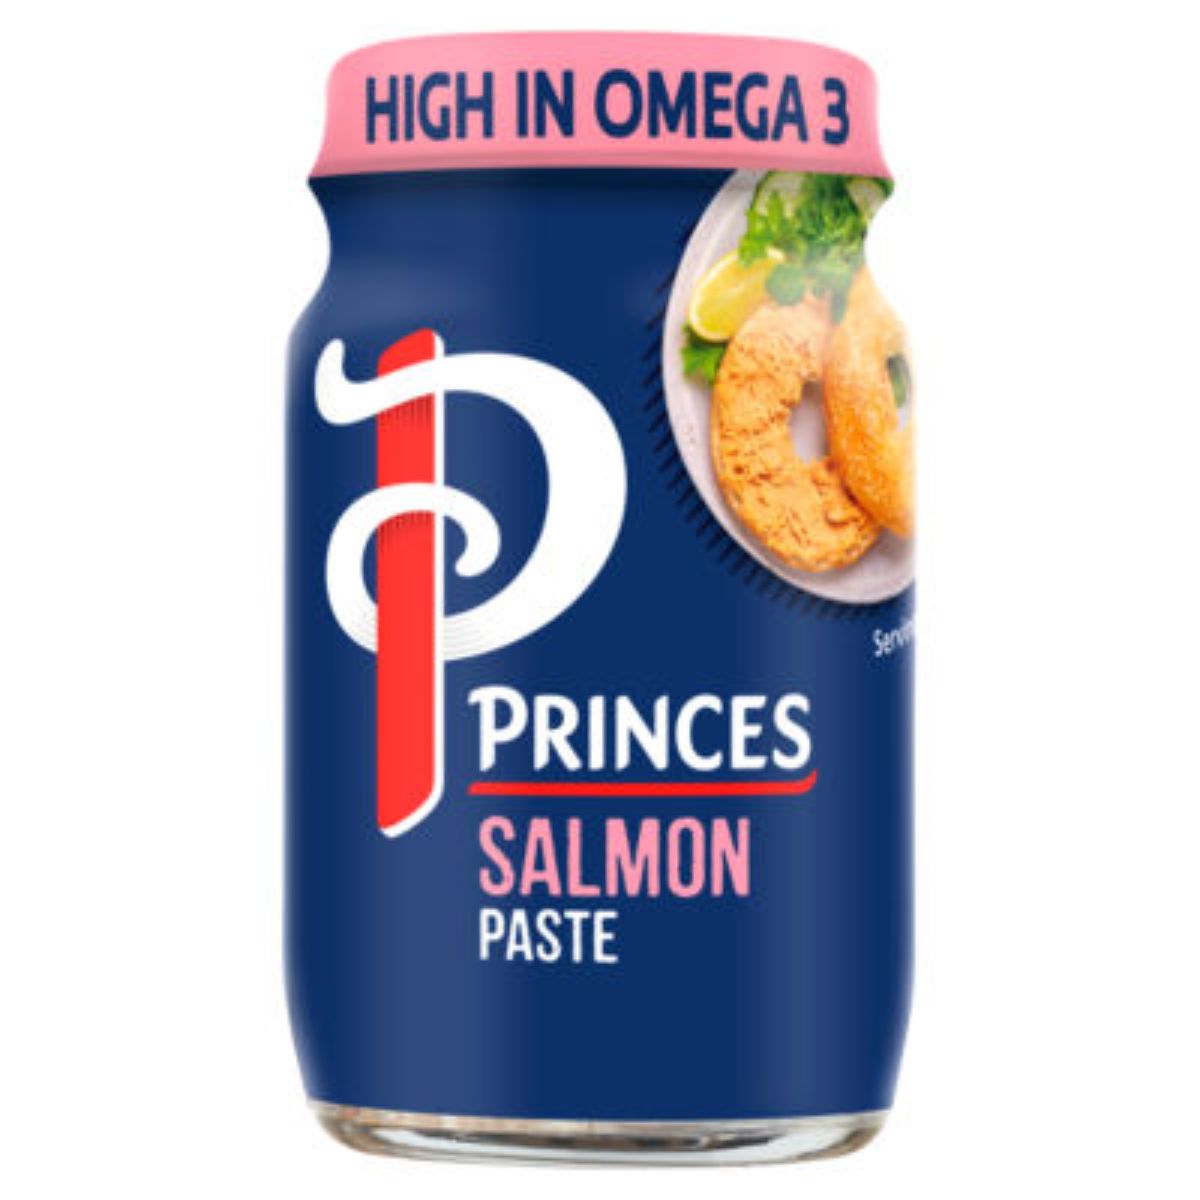 A jar of Princes Salmon Paste, noted as being high in omega 3.